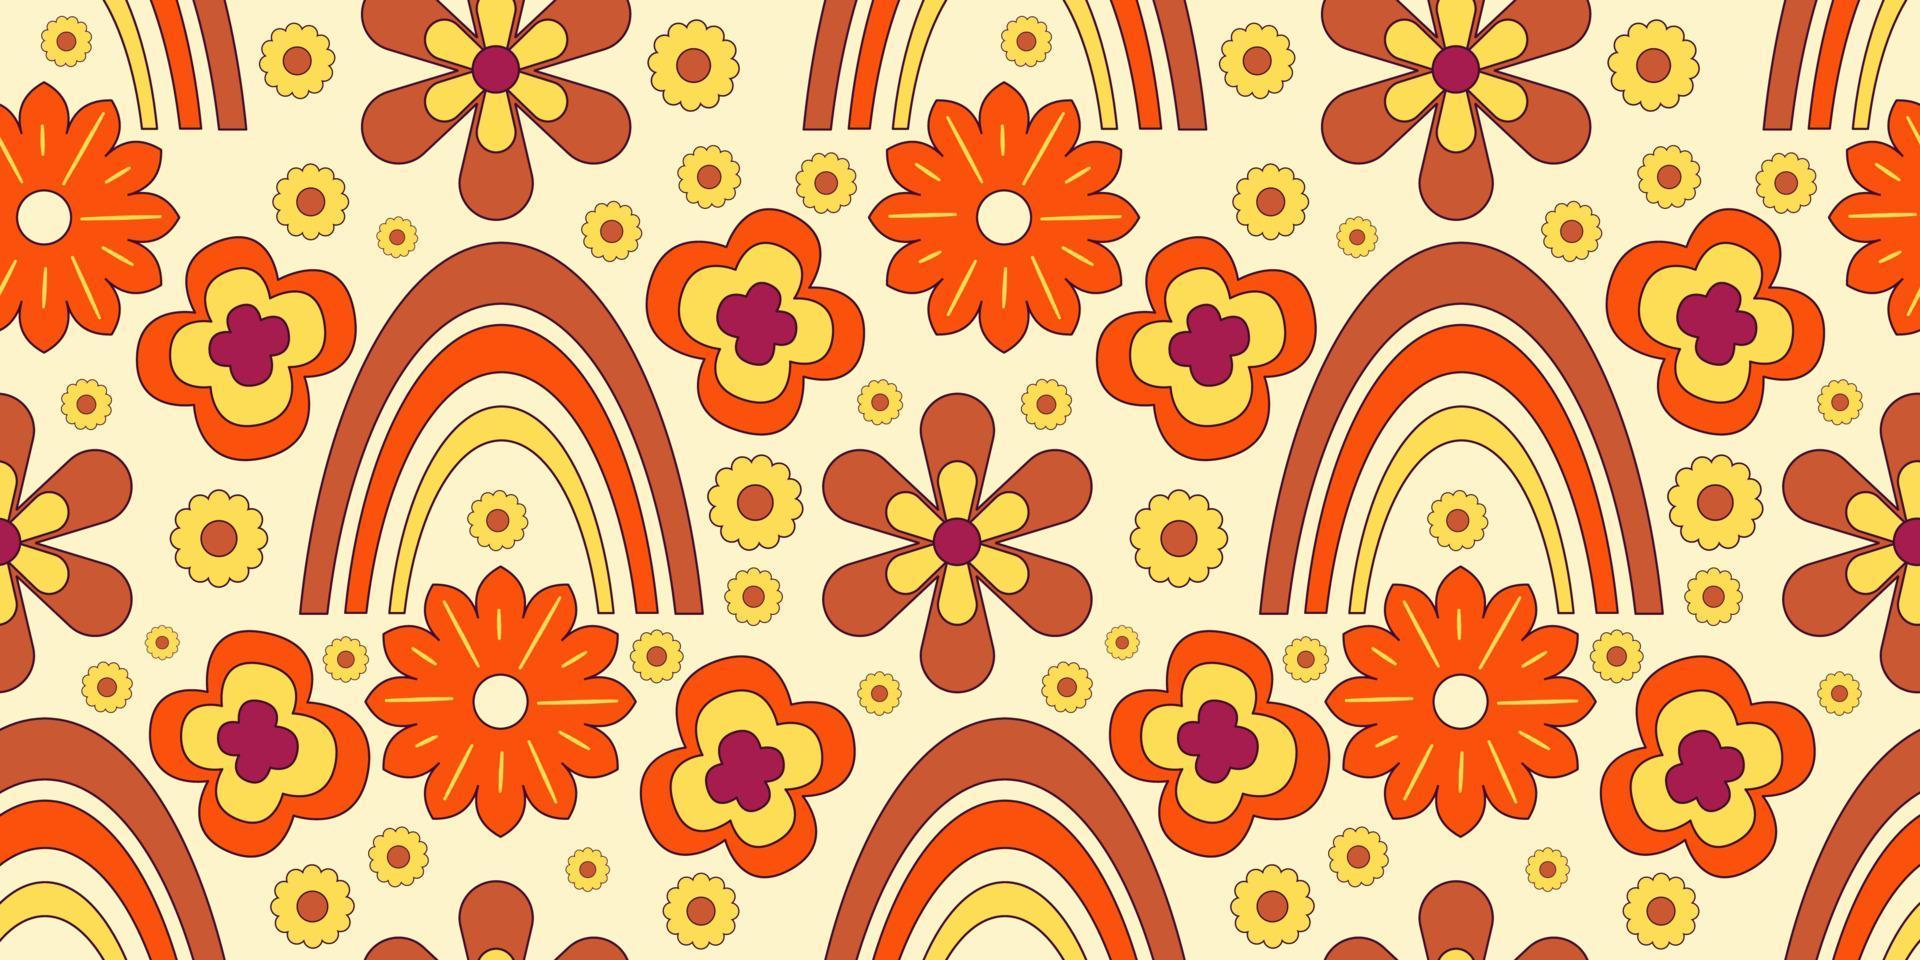 Groovy y2k retro seamless pattern with flower and rainbow. Retro vector illustration. Groovy flower background. Colorful hippie seamless pattern illustration.